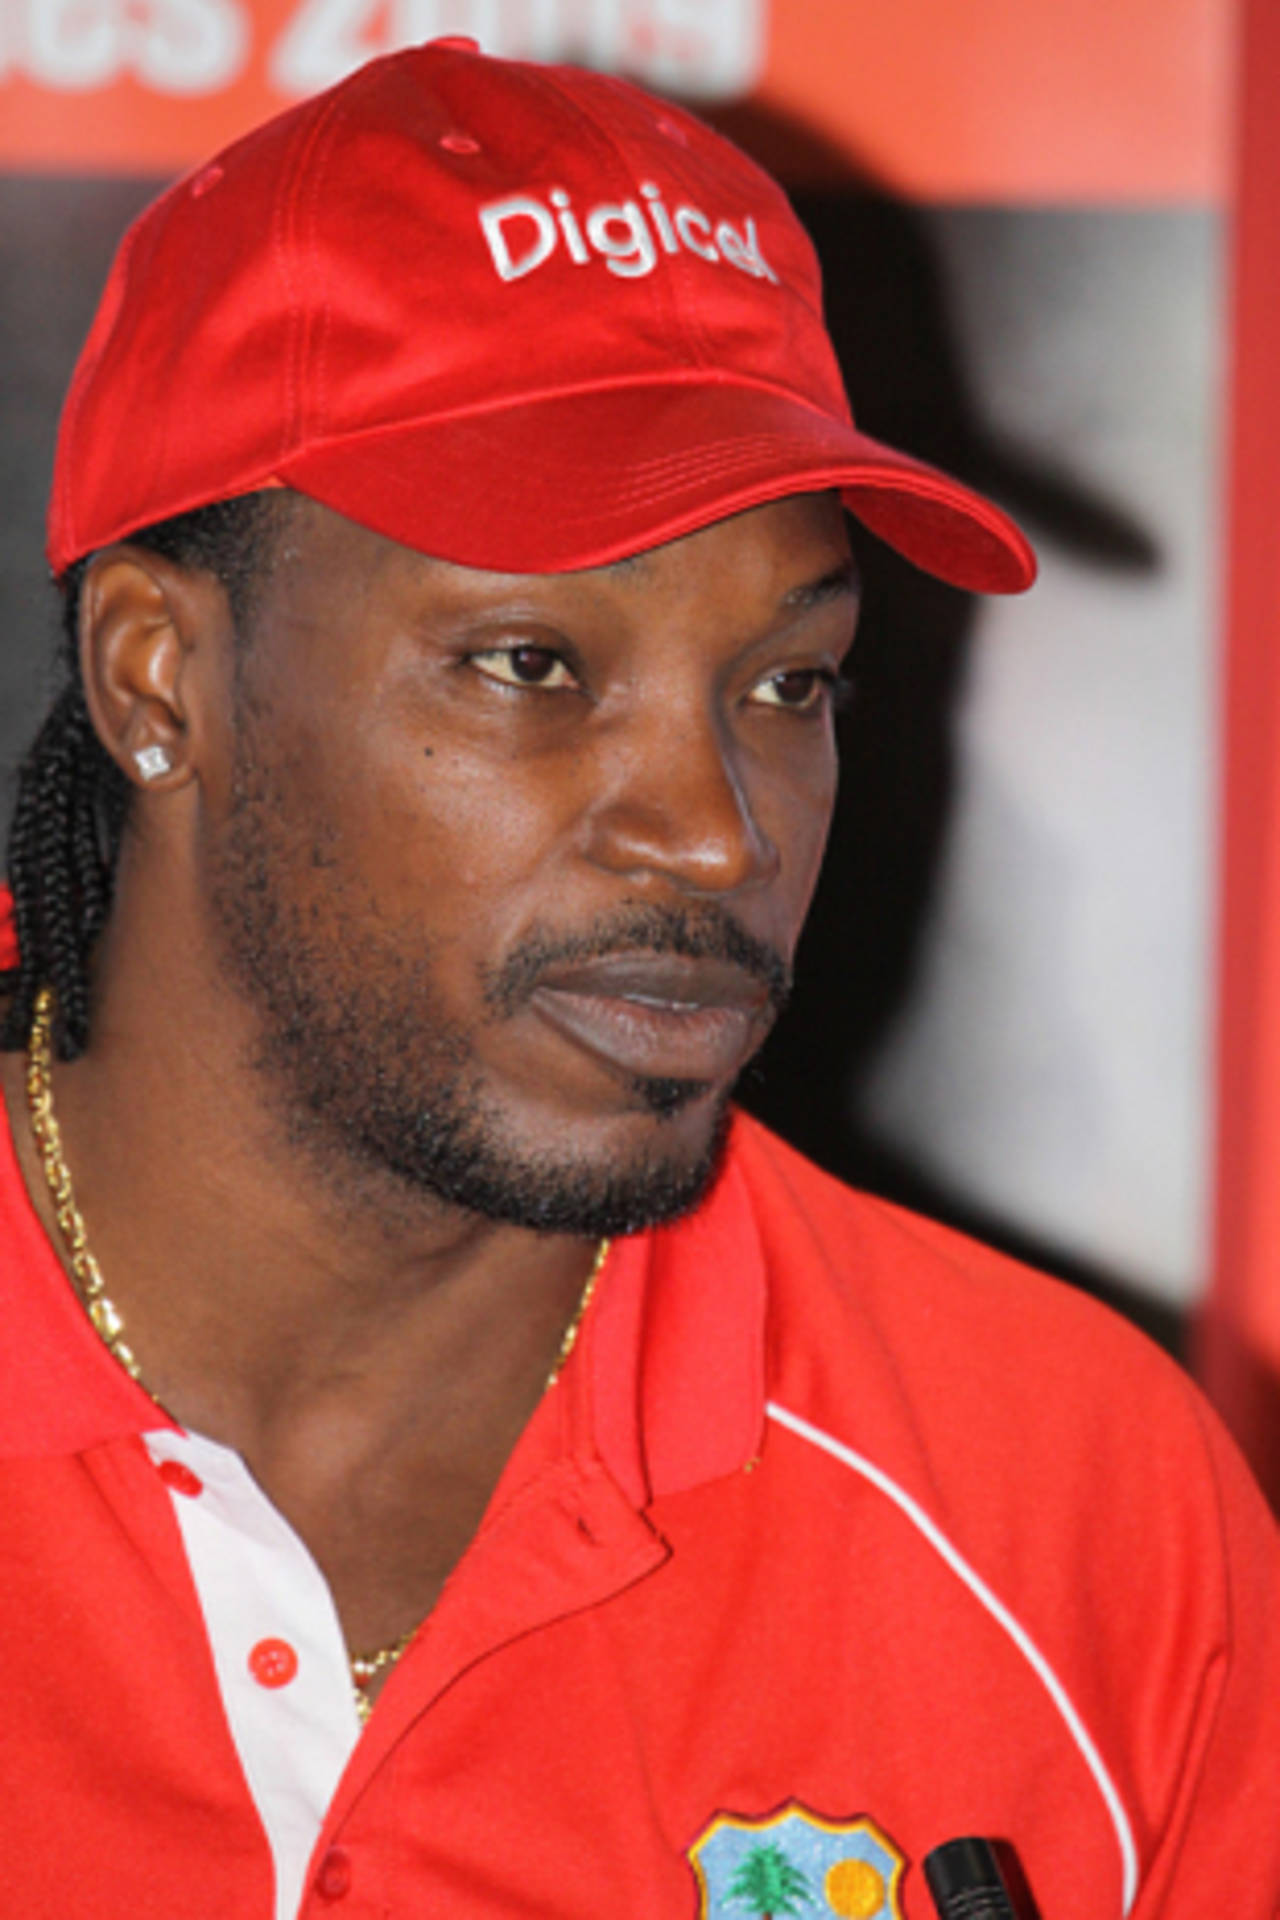 Chris Gayle speaks to participants at a Digicel Cricket Clinic, Turks & Caicos Islands, September 10, 2009